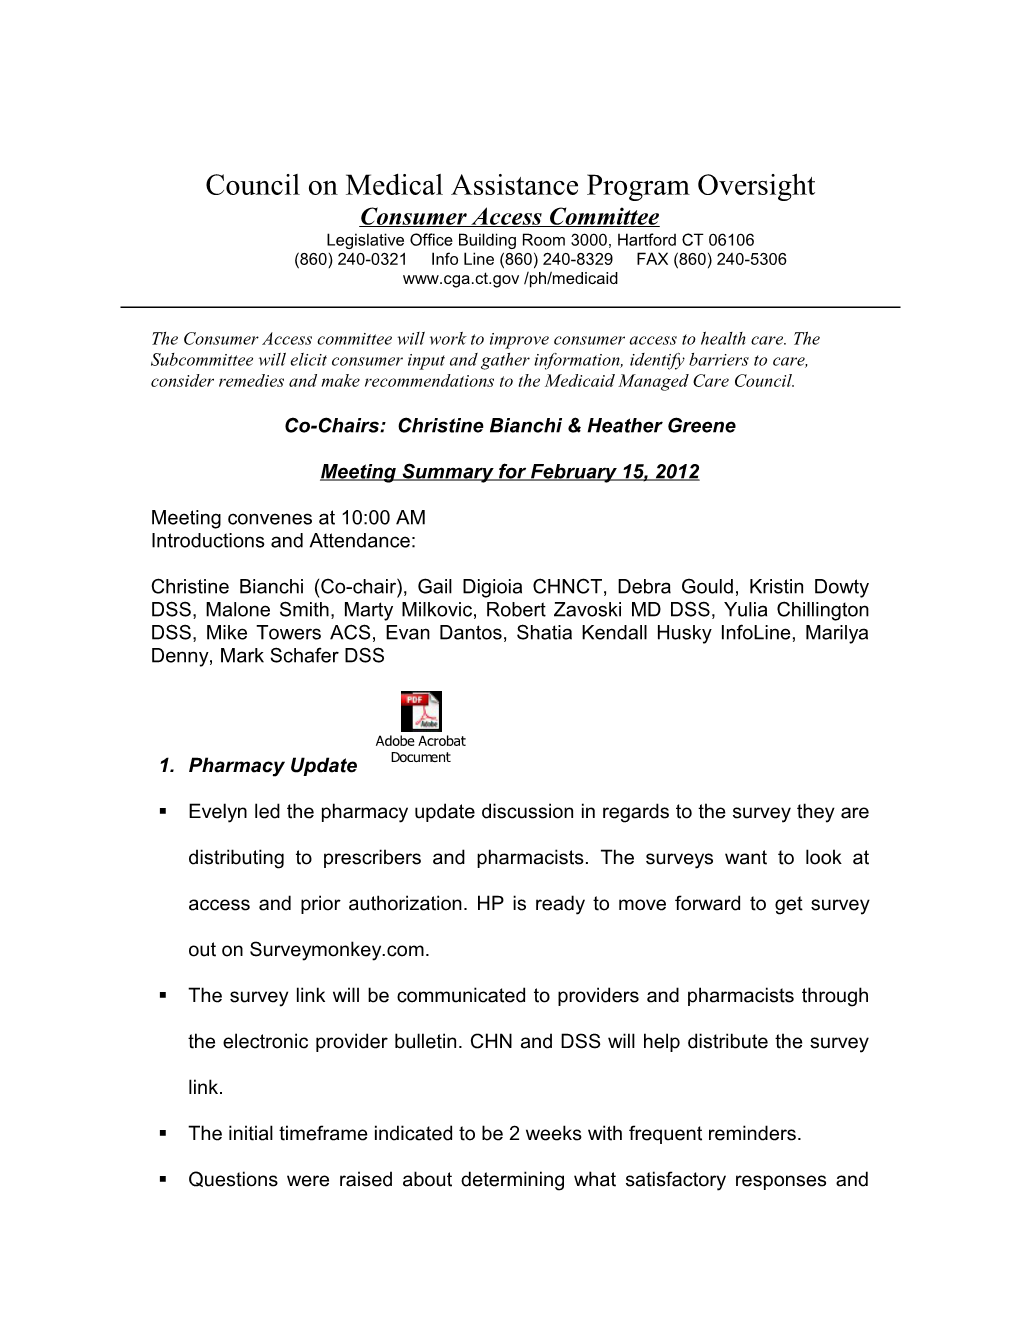 Council on Medical Assistance Program Oversight s2